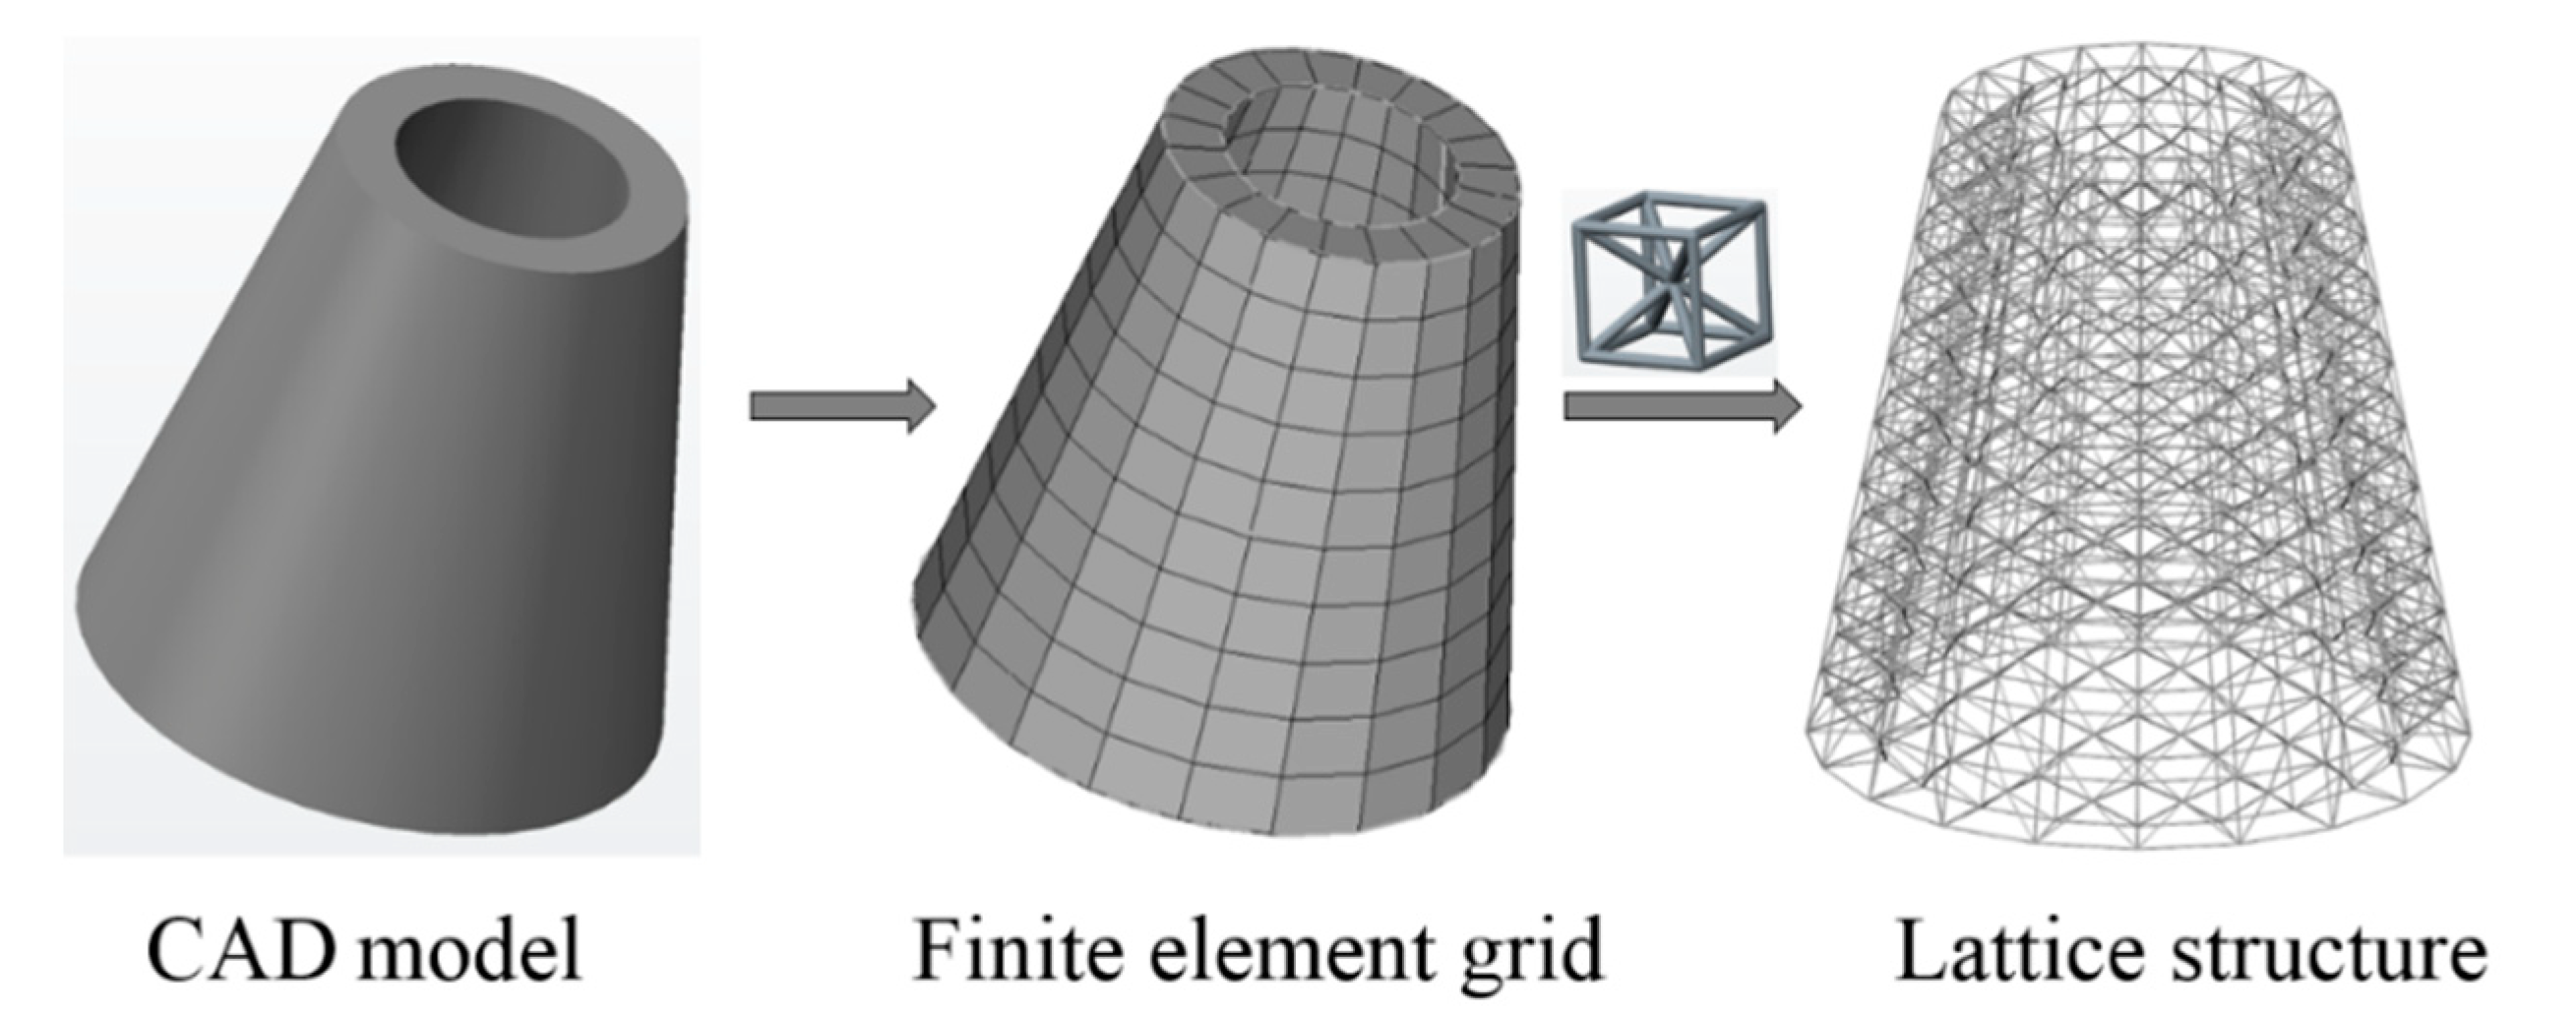 Materials | Free Full-Text | Finite-Element-Mesh Based Method for Modeling  and Optimization of Lattice Structures for Additive Manufacturing